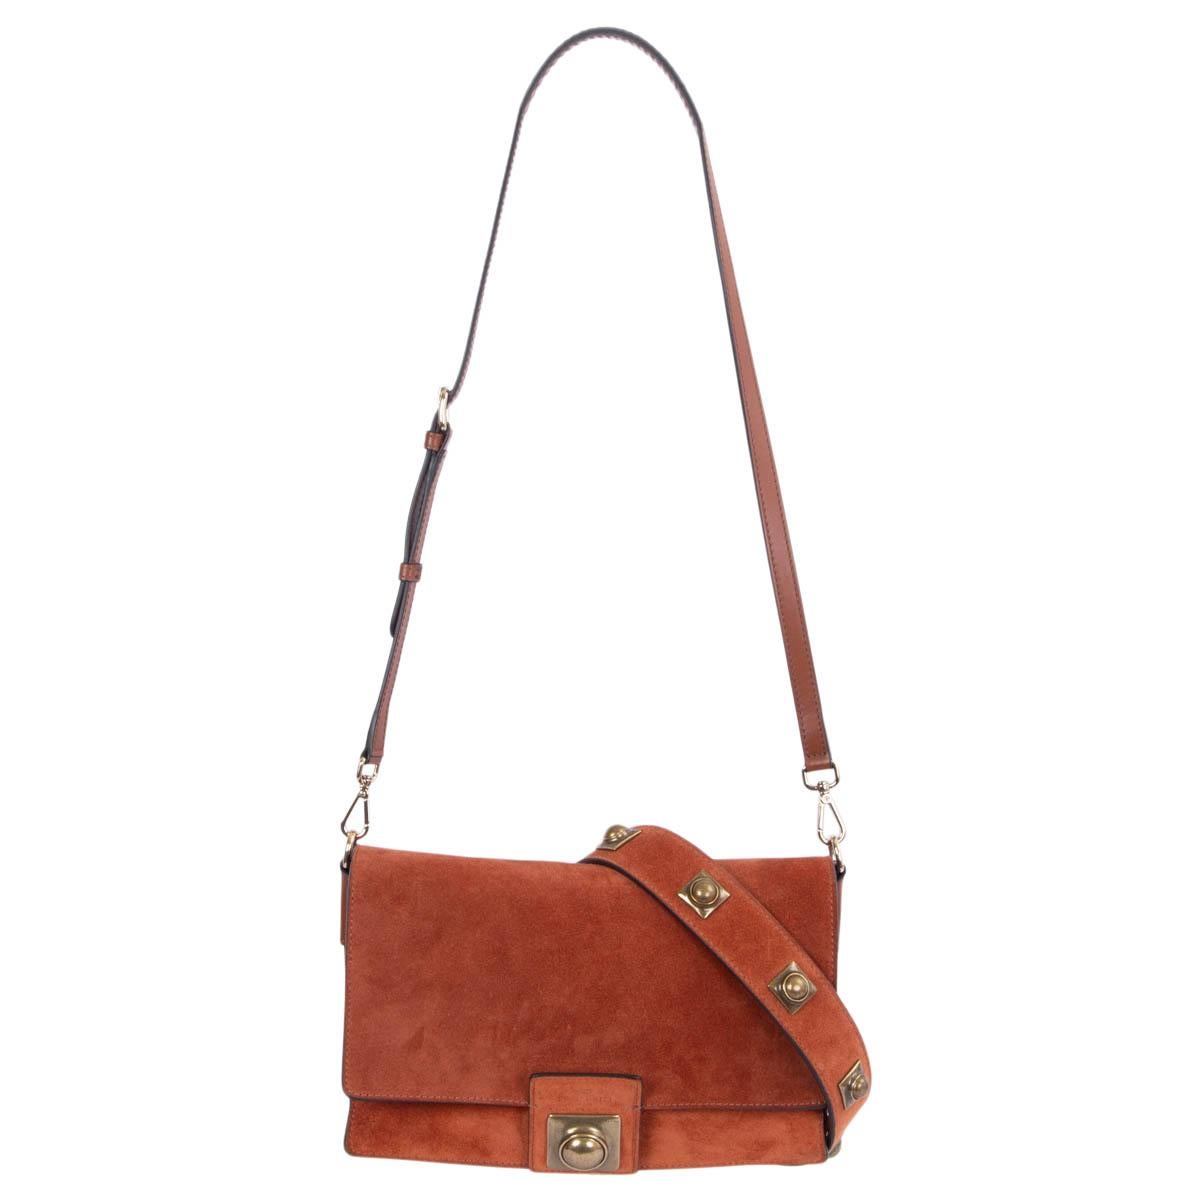 100% authentic Etro Crown Me shoulder bag in rust brown suede leather embellished strap and closure made of antique gold-tone hardware. Interior is lined in rust brown calfskin and suede divided in two copartments with one zipper pocket against the